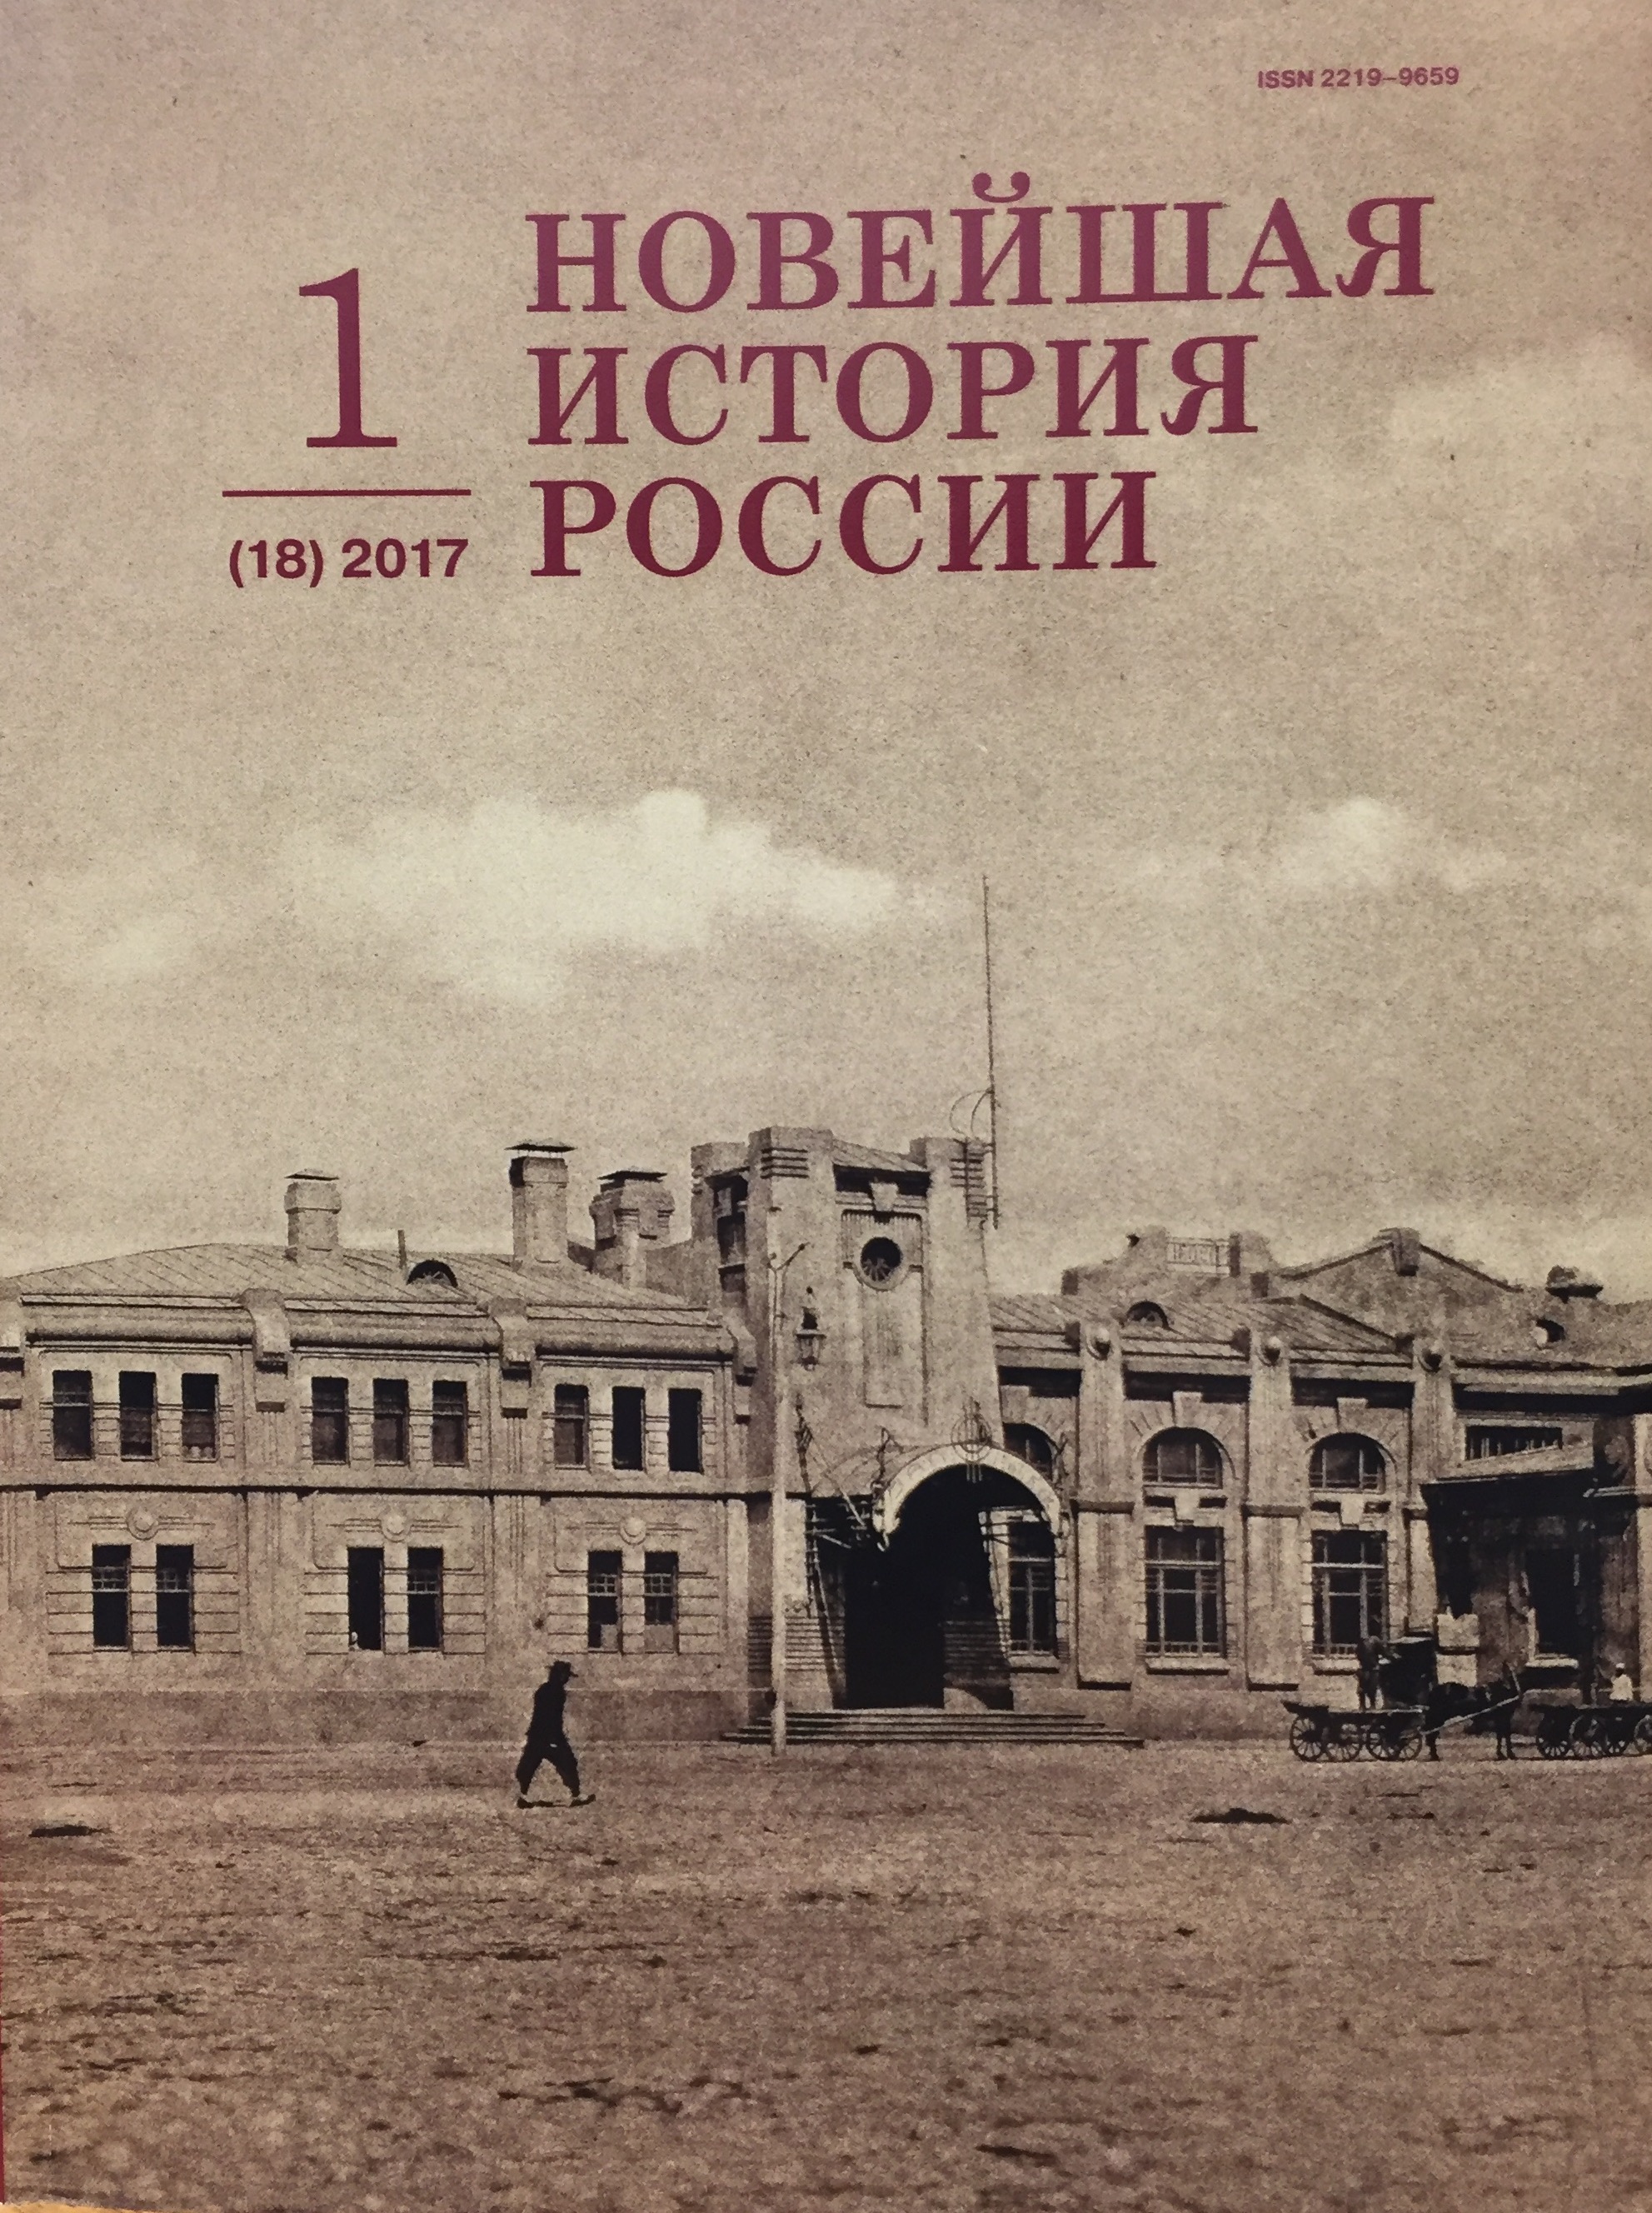 The Modern Approaches to the Study of «Leningrad Affair» of the late 1940s — early 1950s in the Russian Semi-Scholarly Literature Cover Image